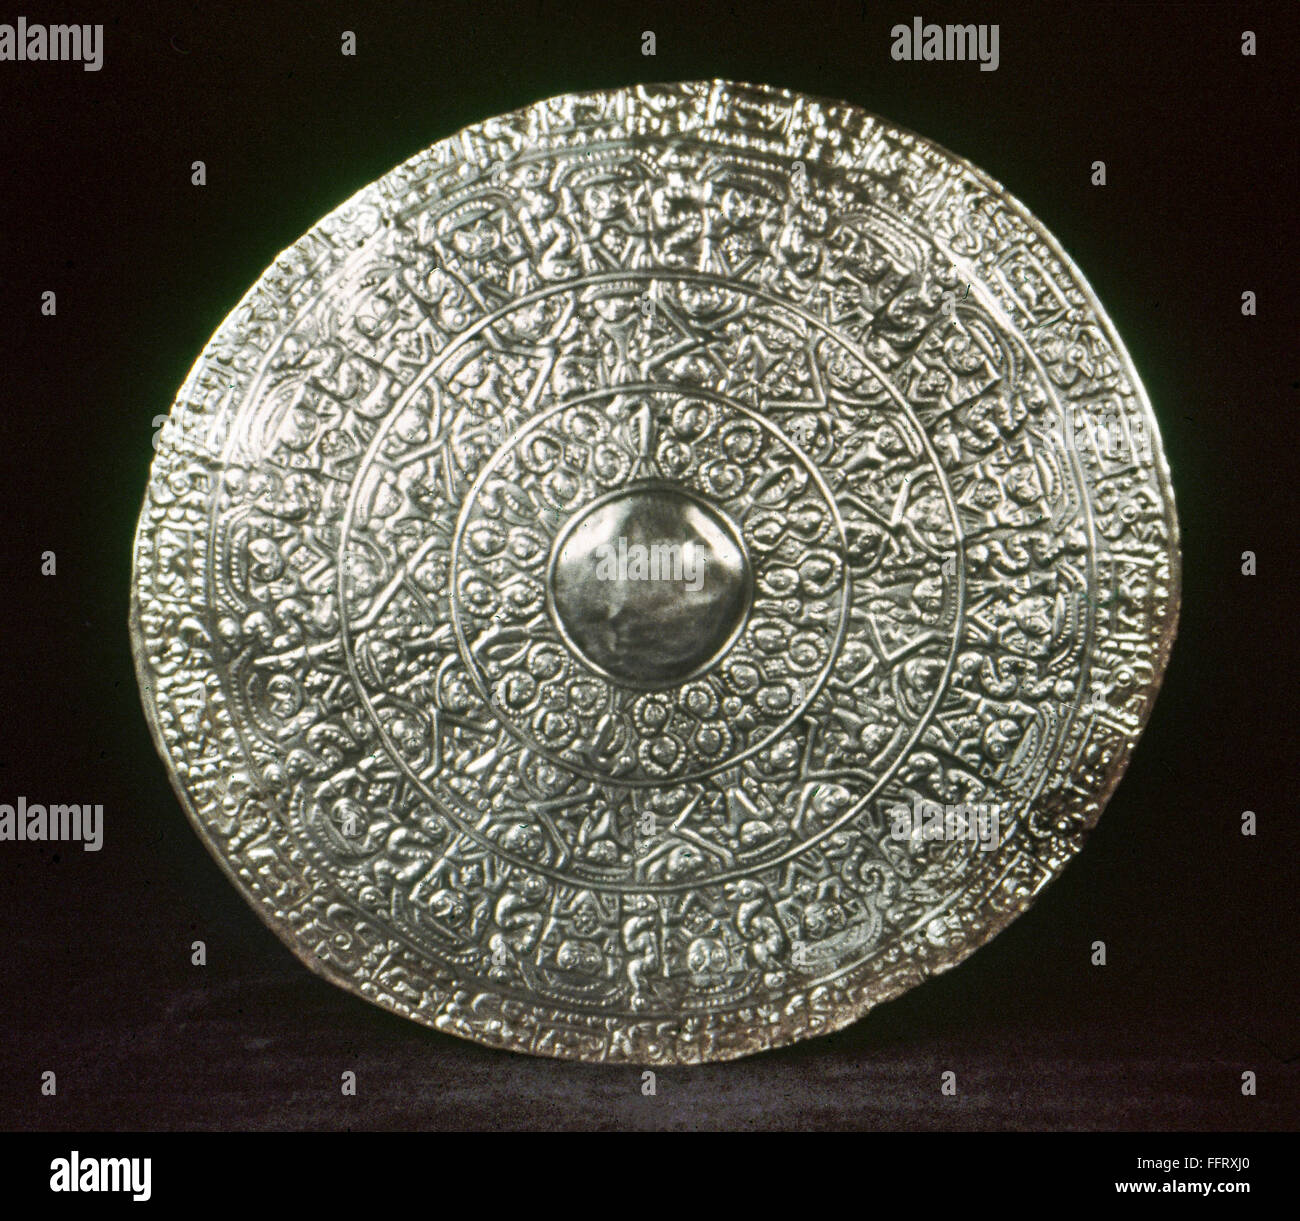 PERU: CHIMU SILVER DISK. /nLarge embossed silver disk made by the Chimu culture of ancient Peru, 13th - 16th century. Stock Photo